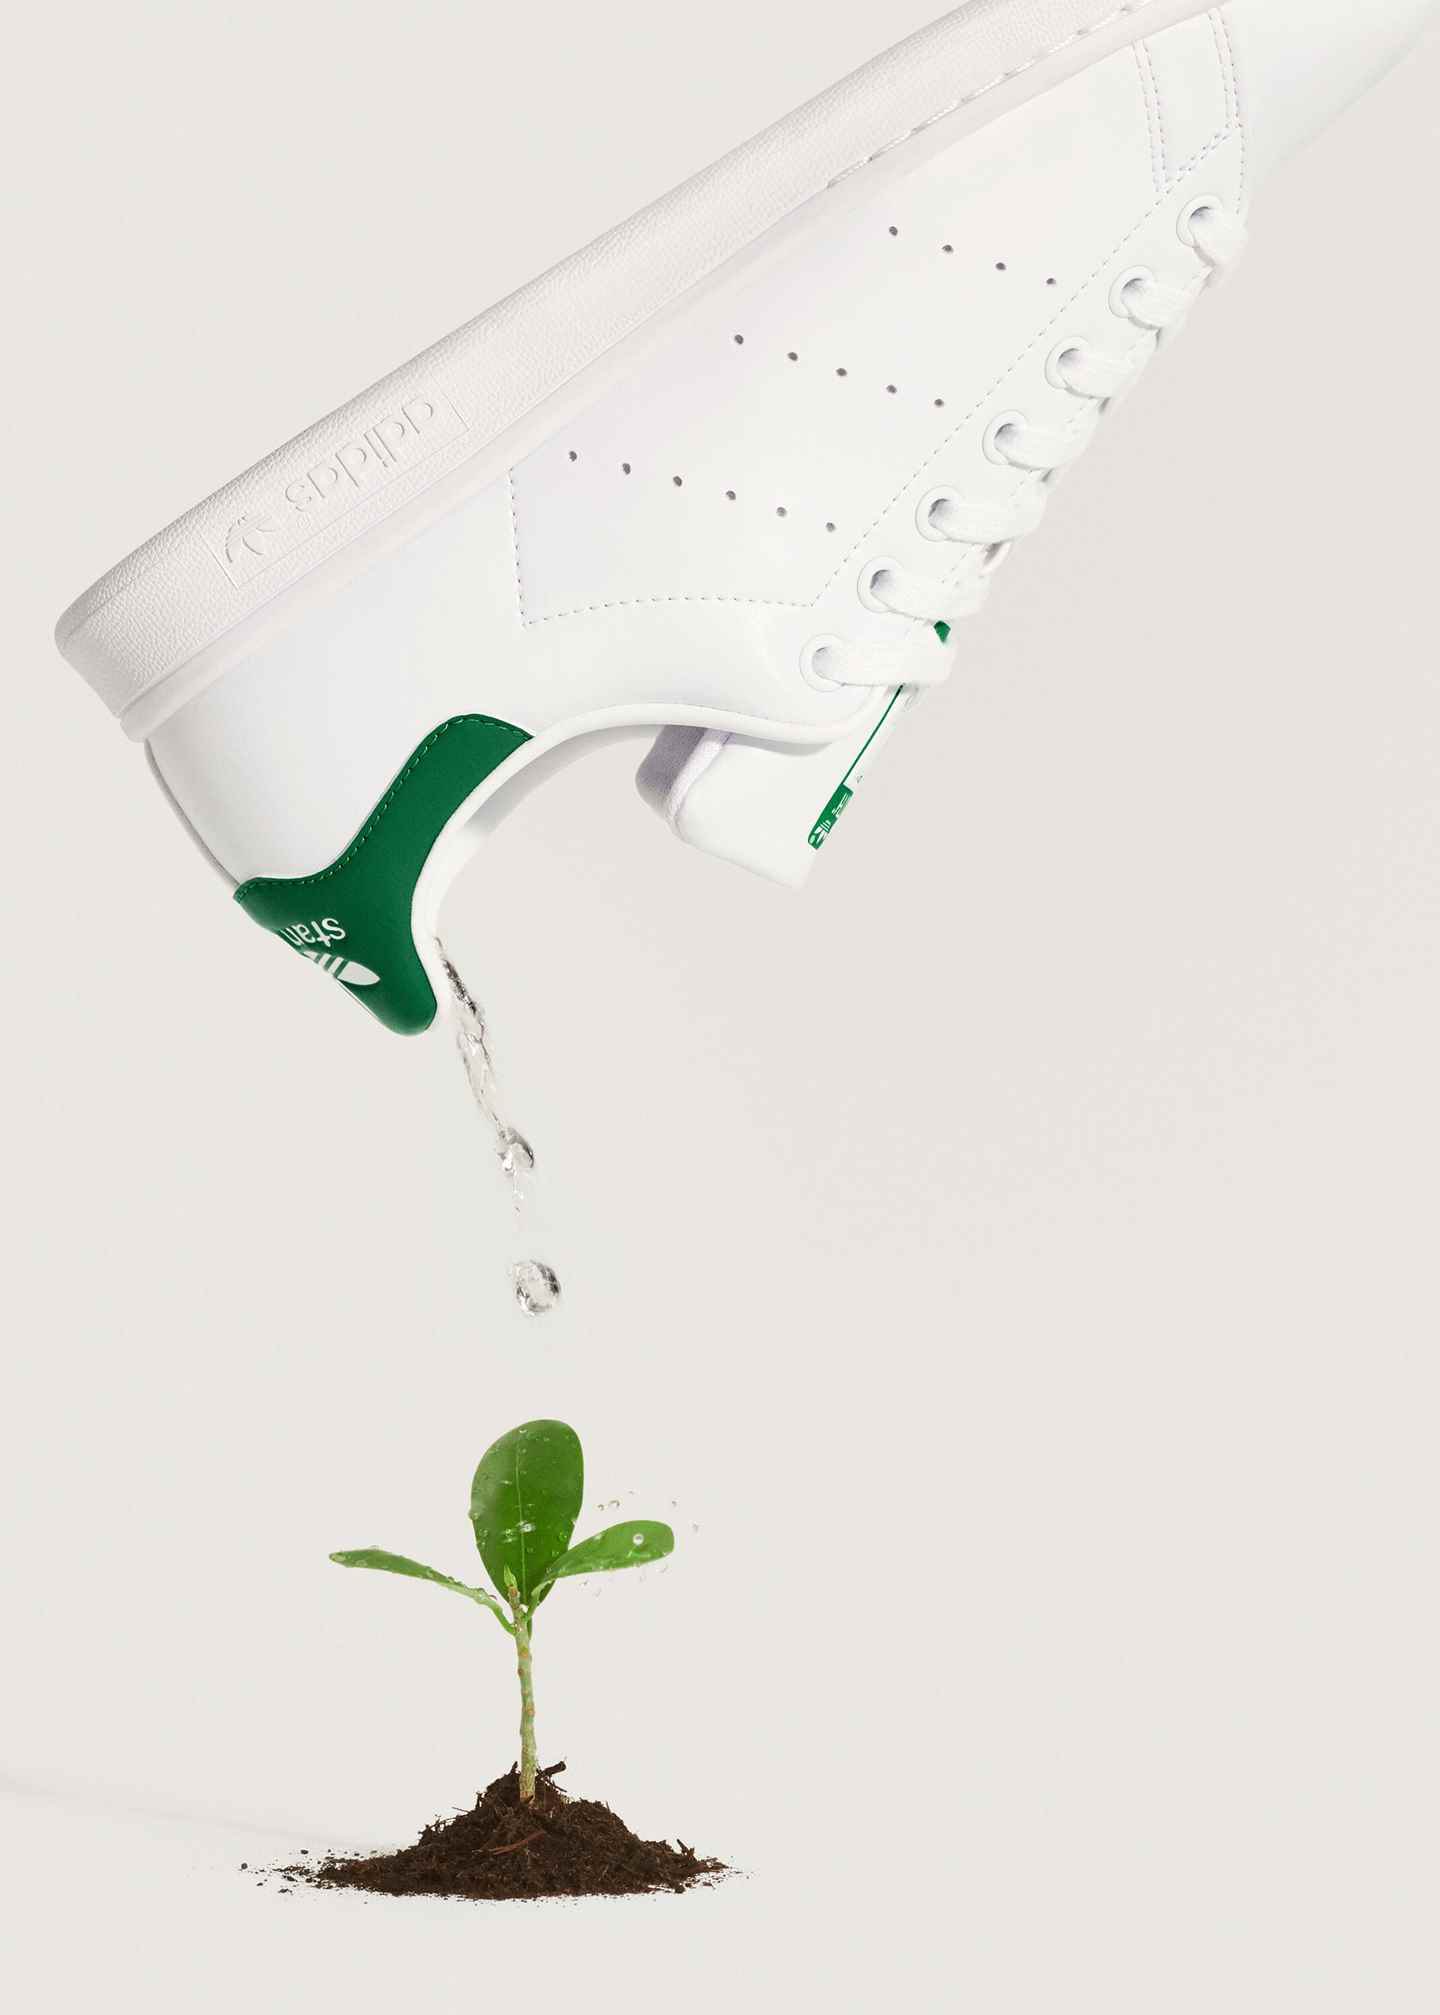 sustainable-sport-brands-stan-smith-adidas-2